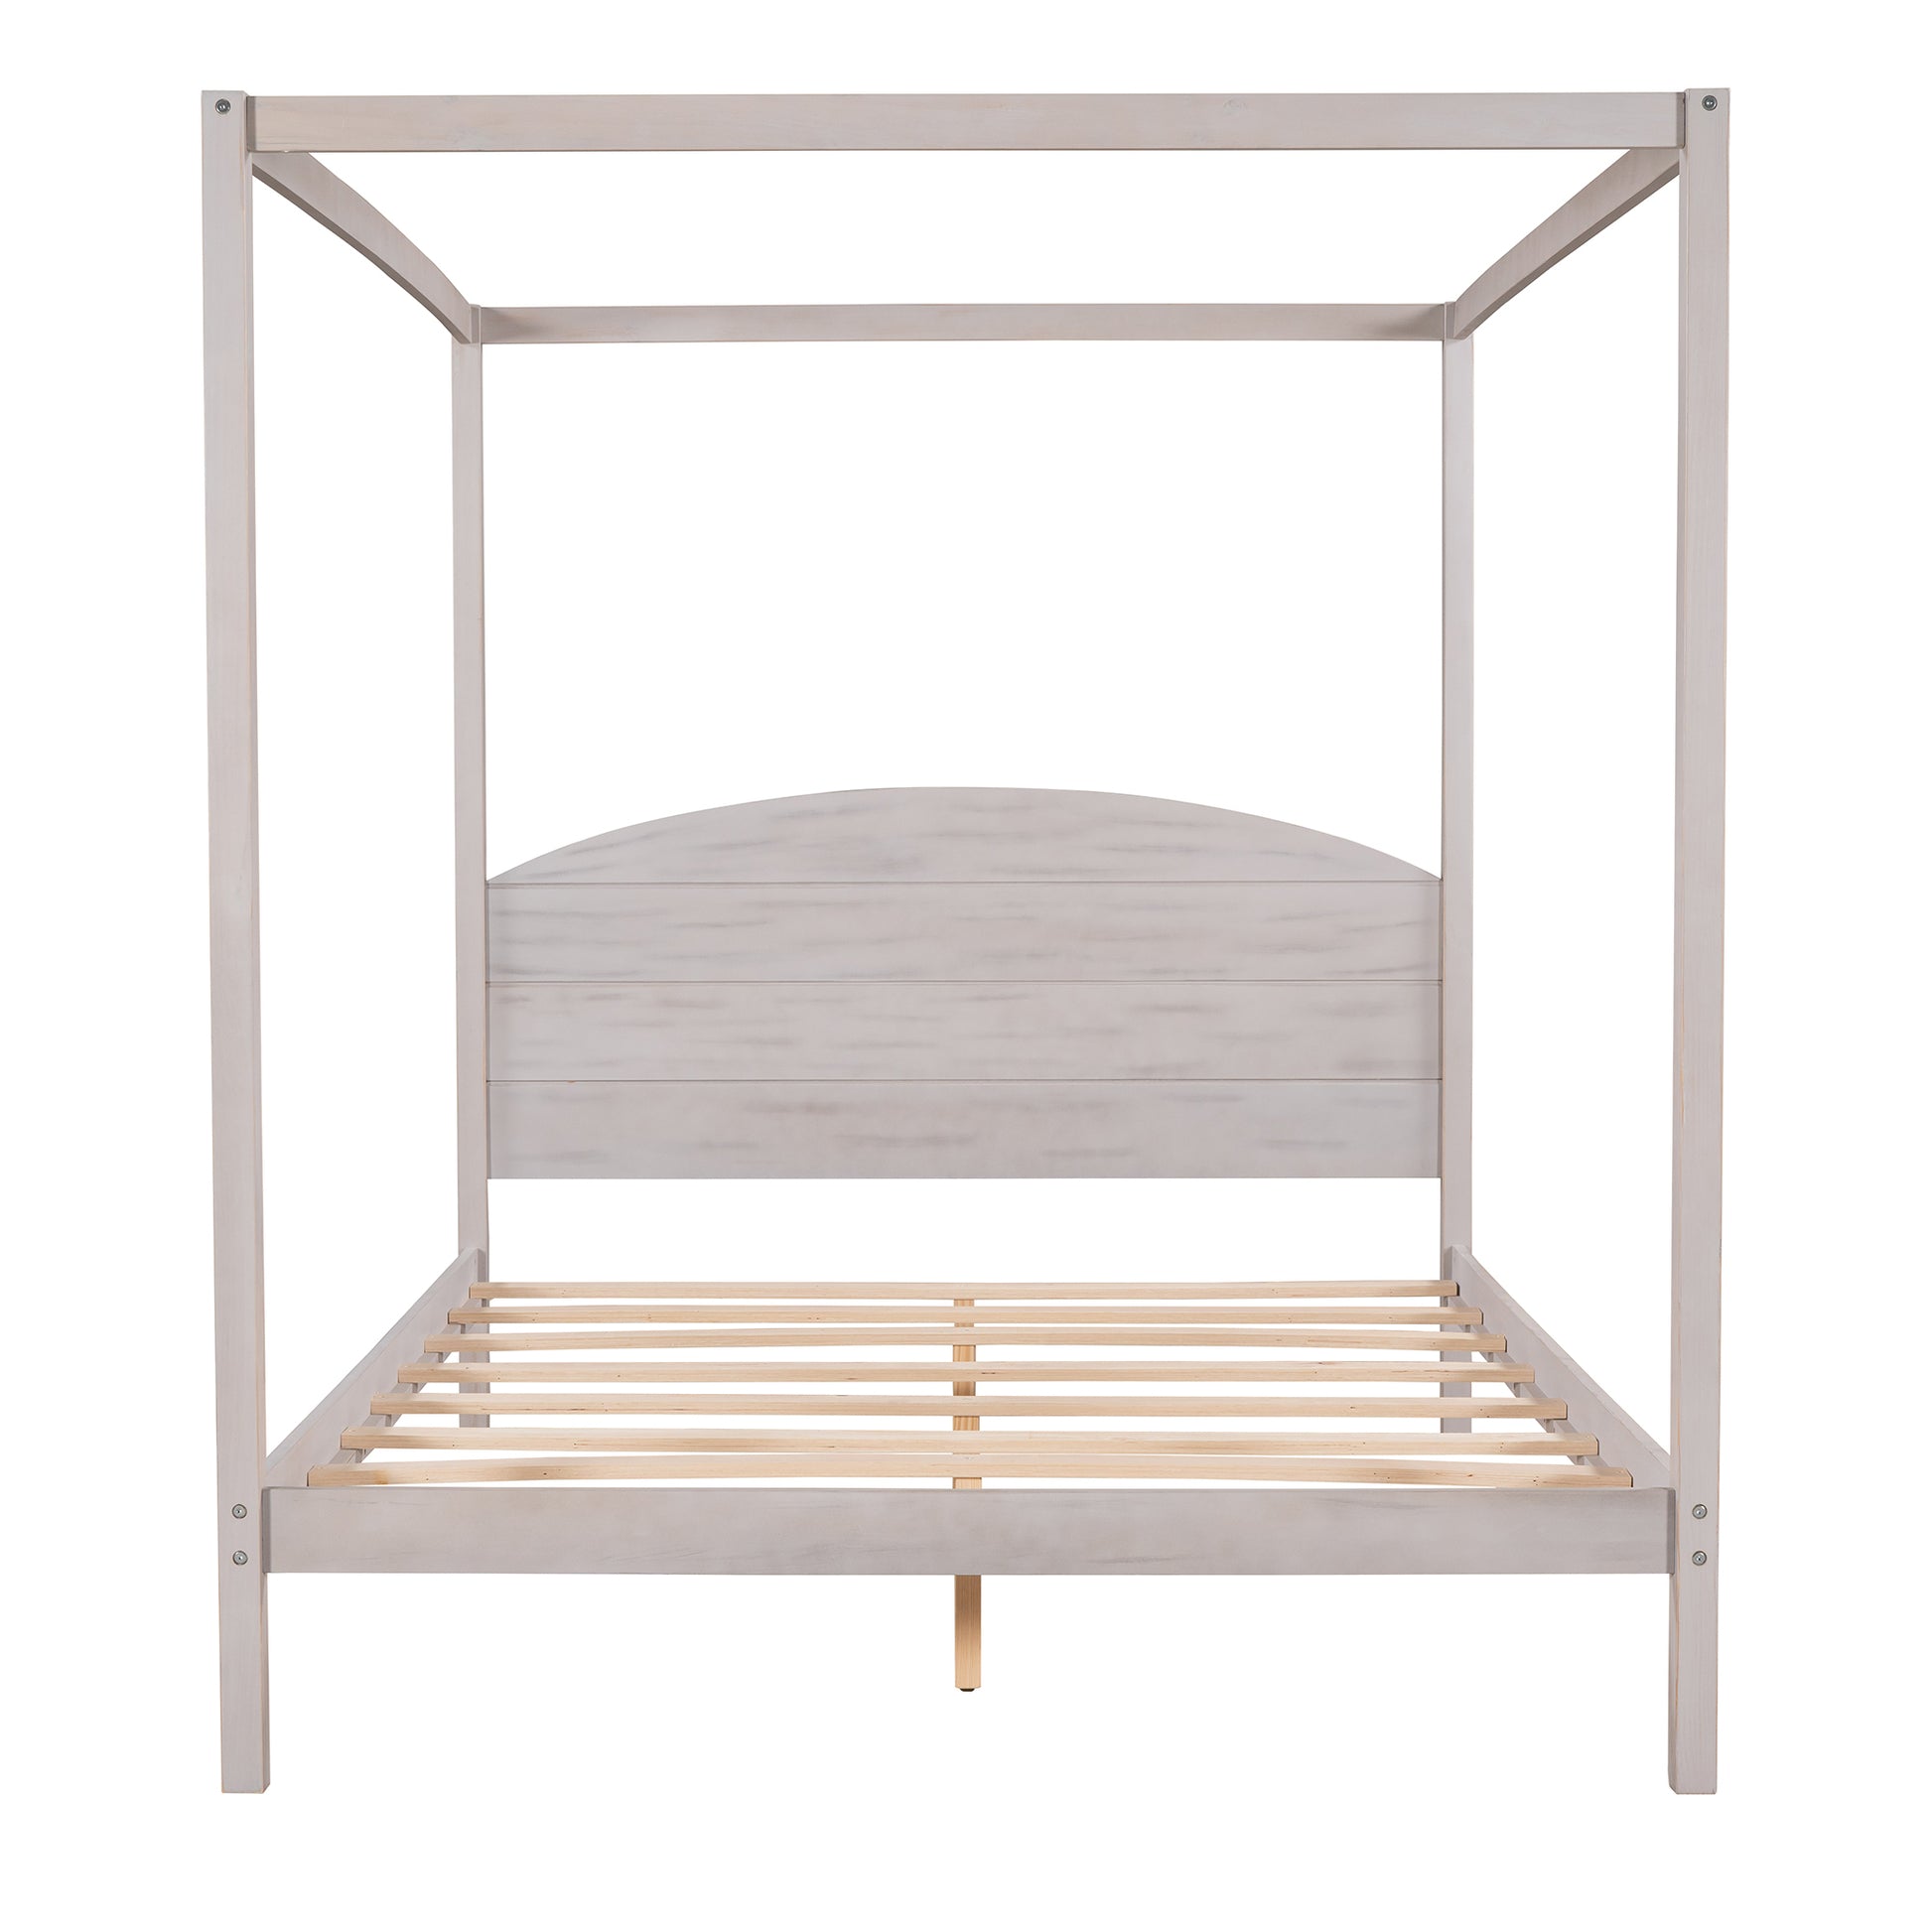 Queen Size Canopy Platform Bed with Headboard and Support Legs,Grey Wash